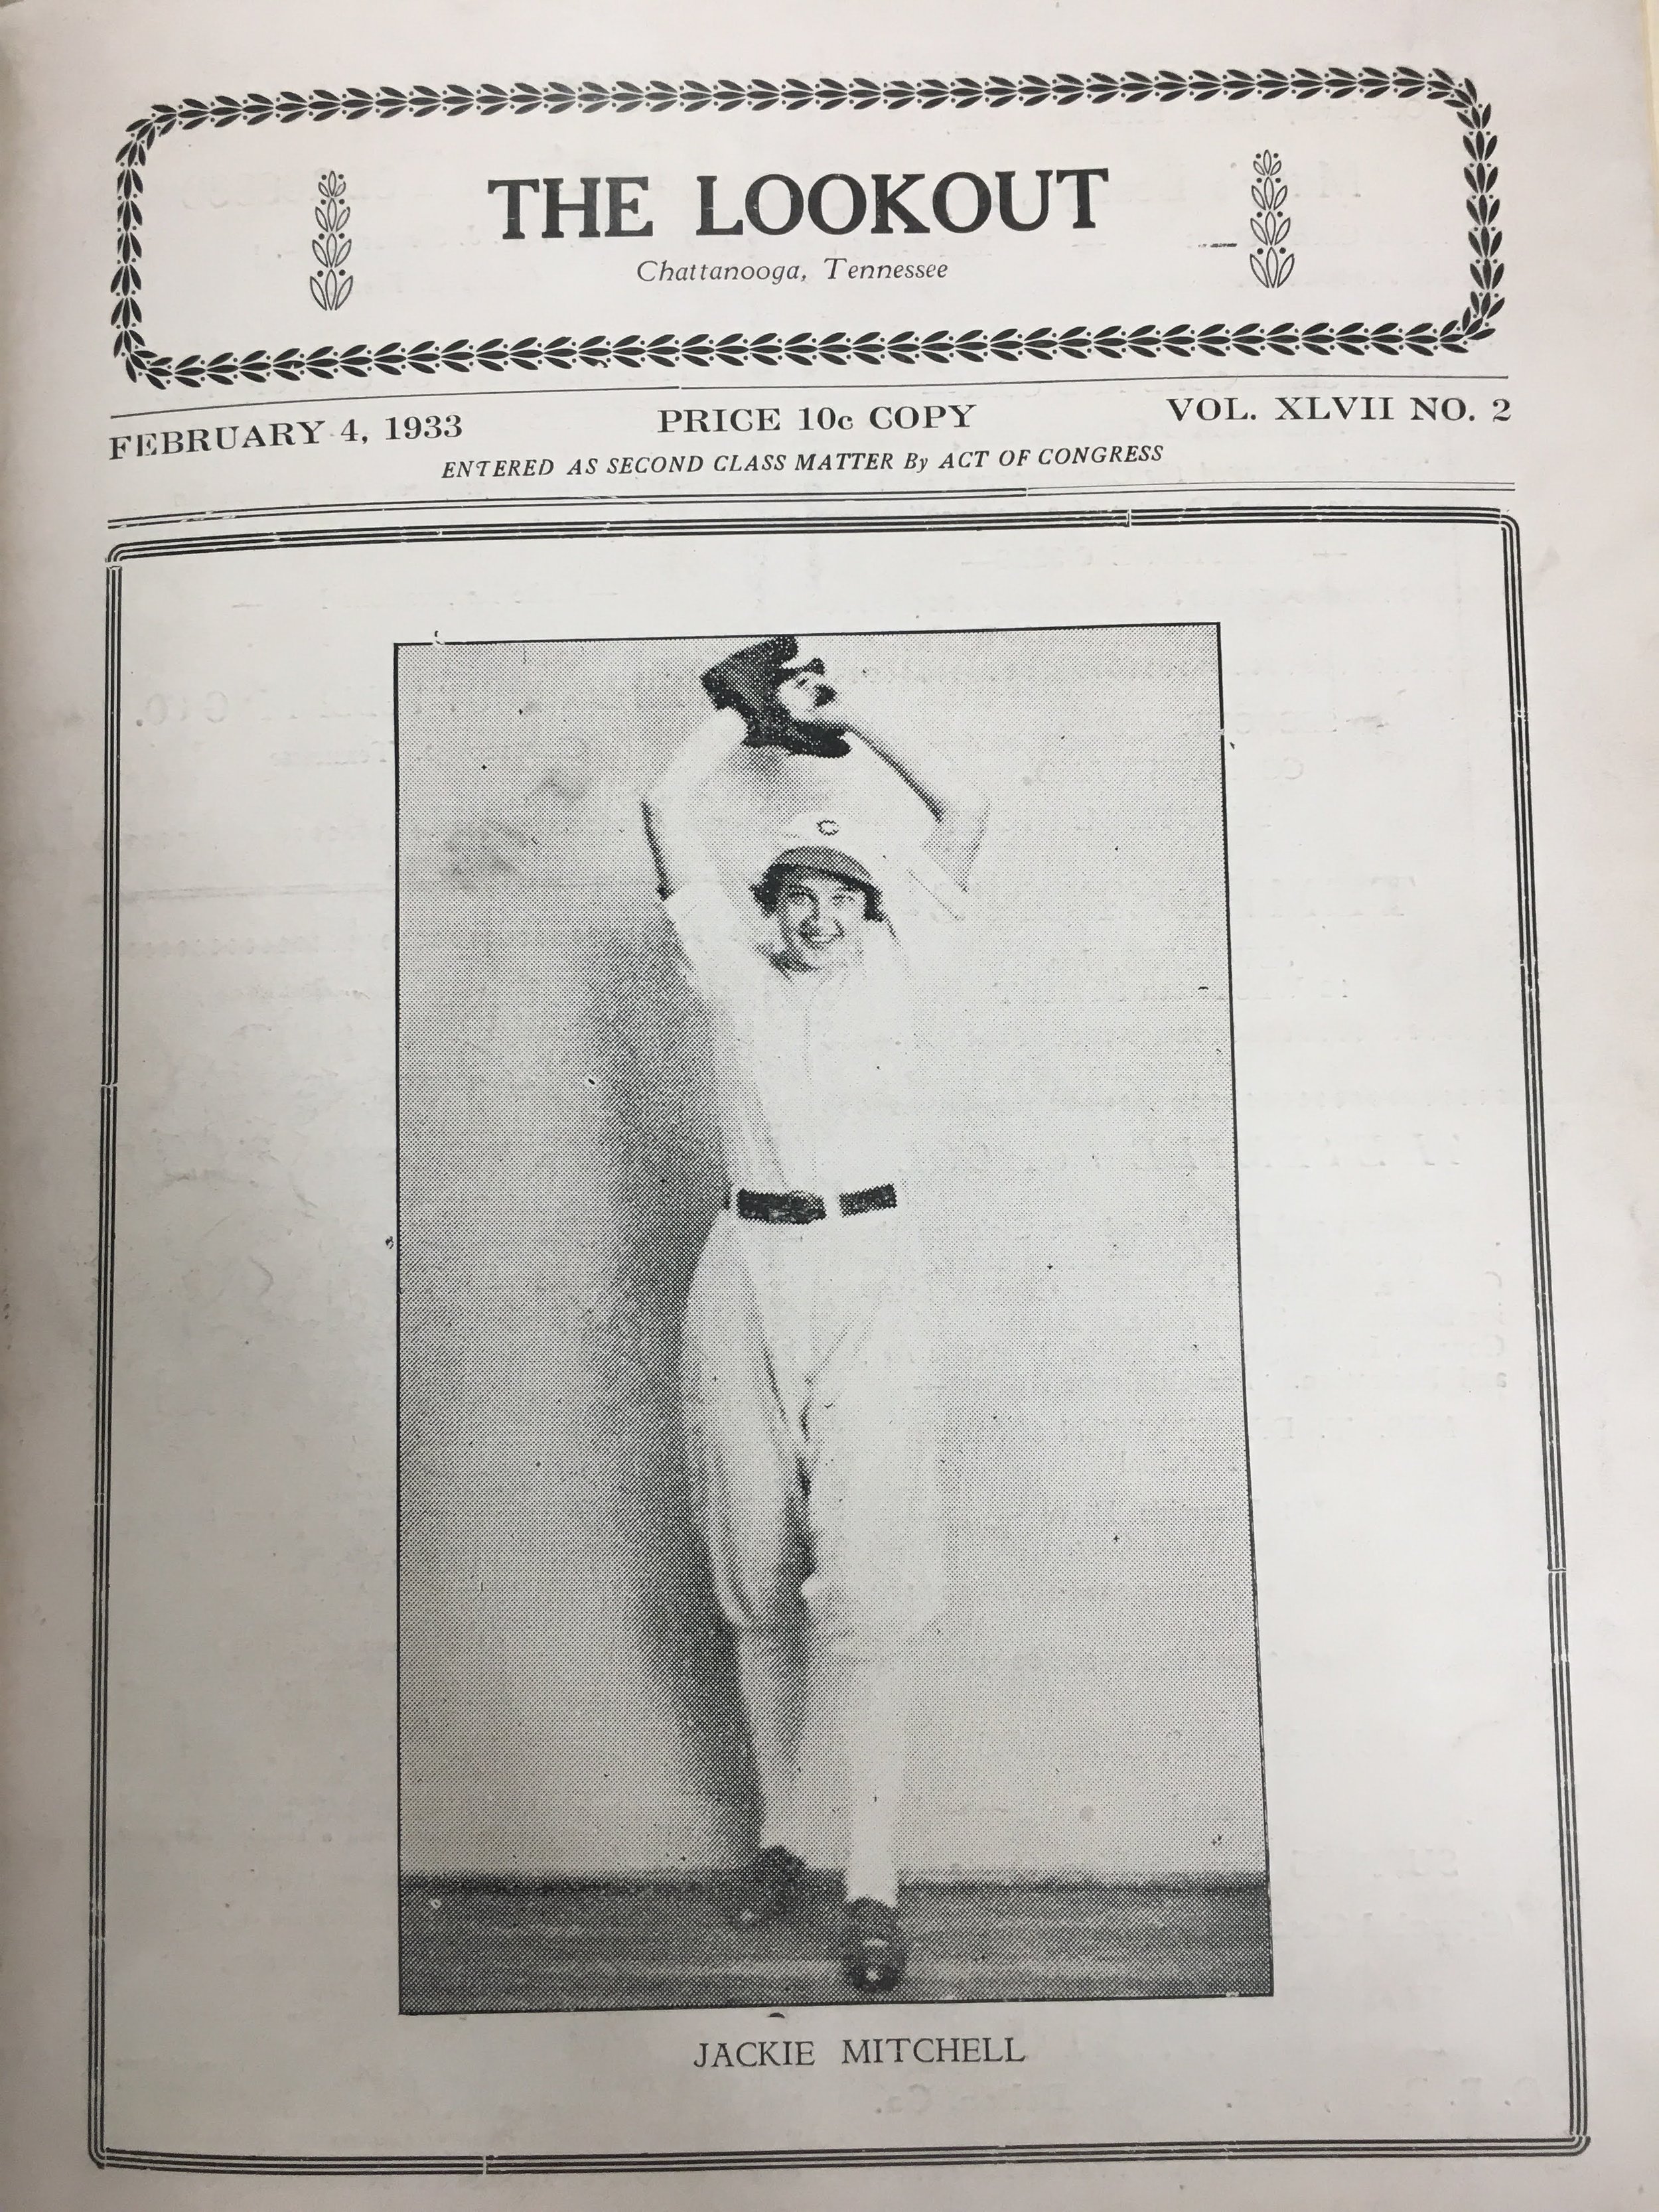   Jackie Mitchell poses for a photograph on the cover of the magazine The Lookout in February 1933. (Chattanooga Public Library archives)   